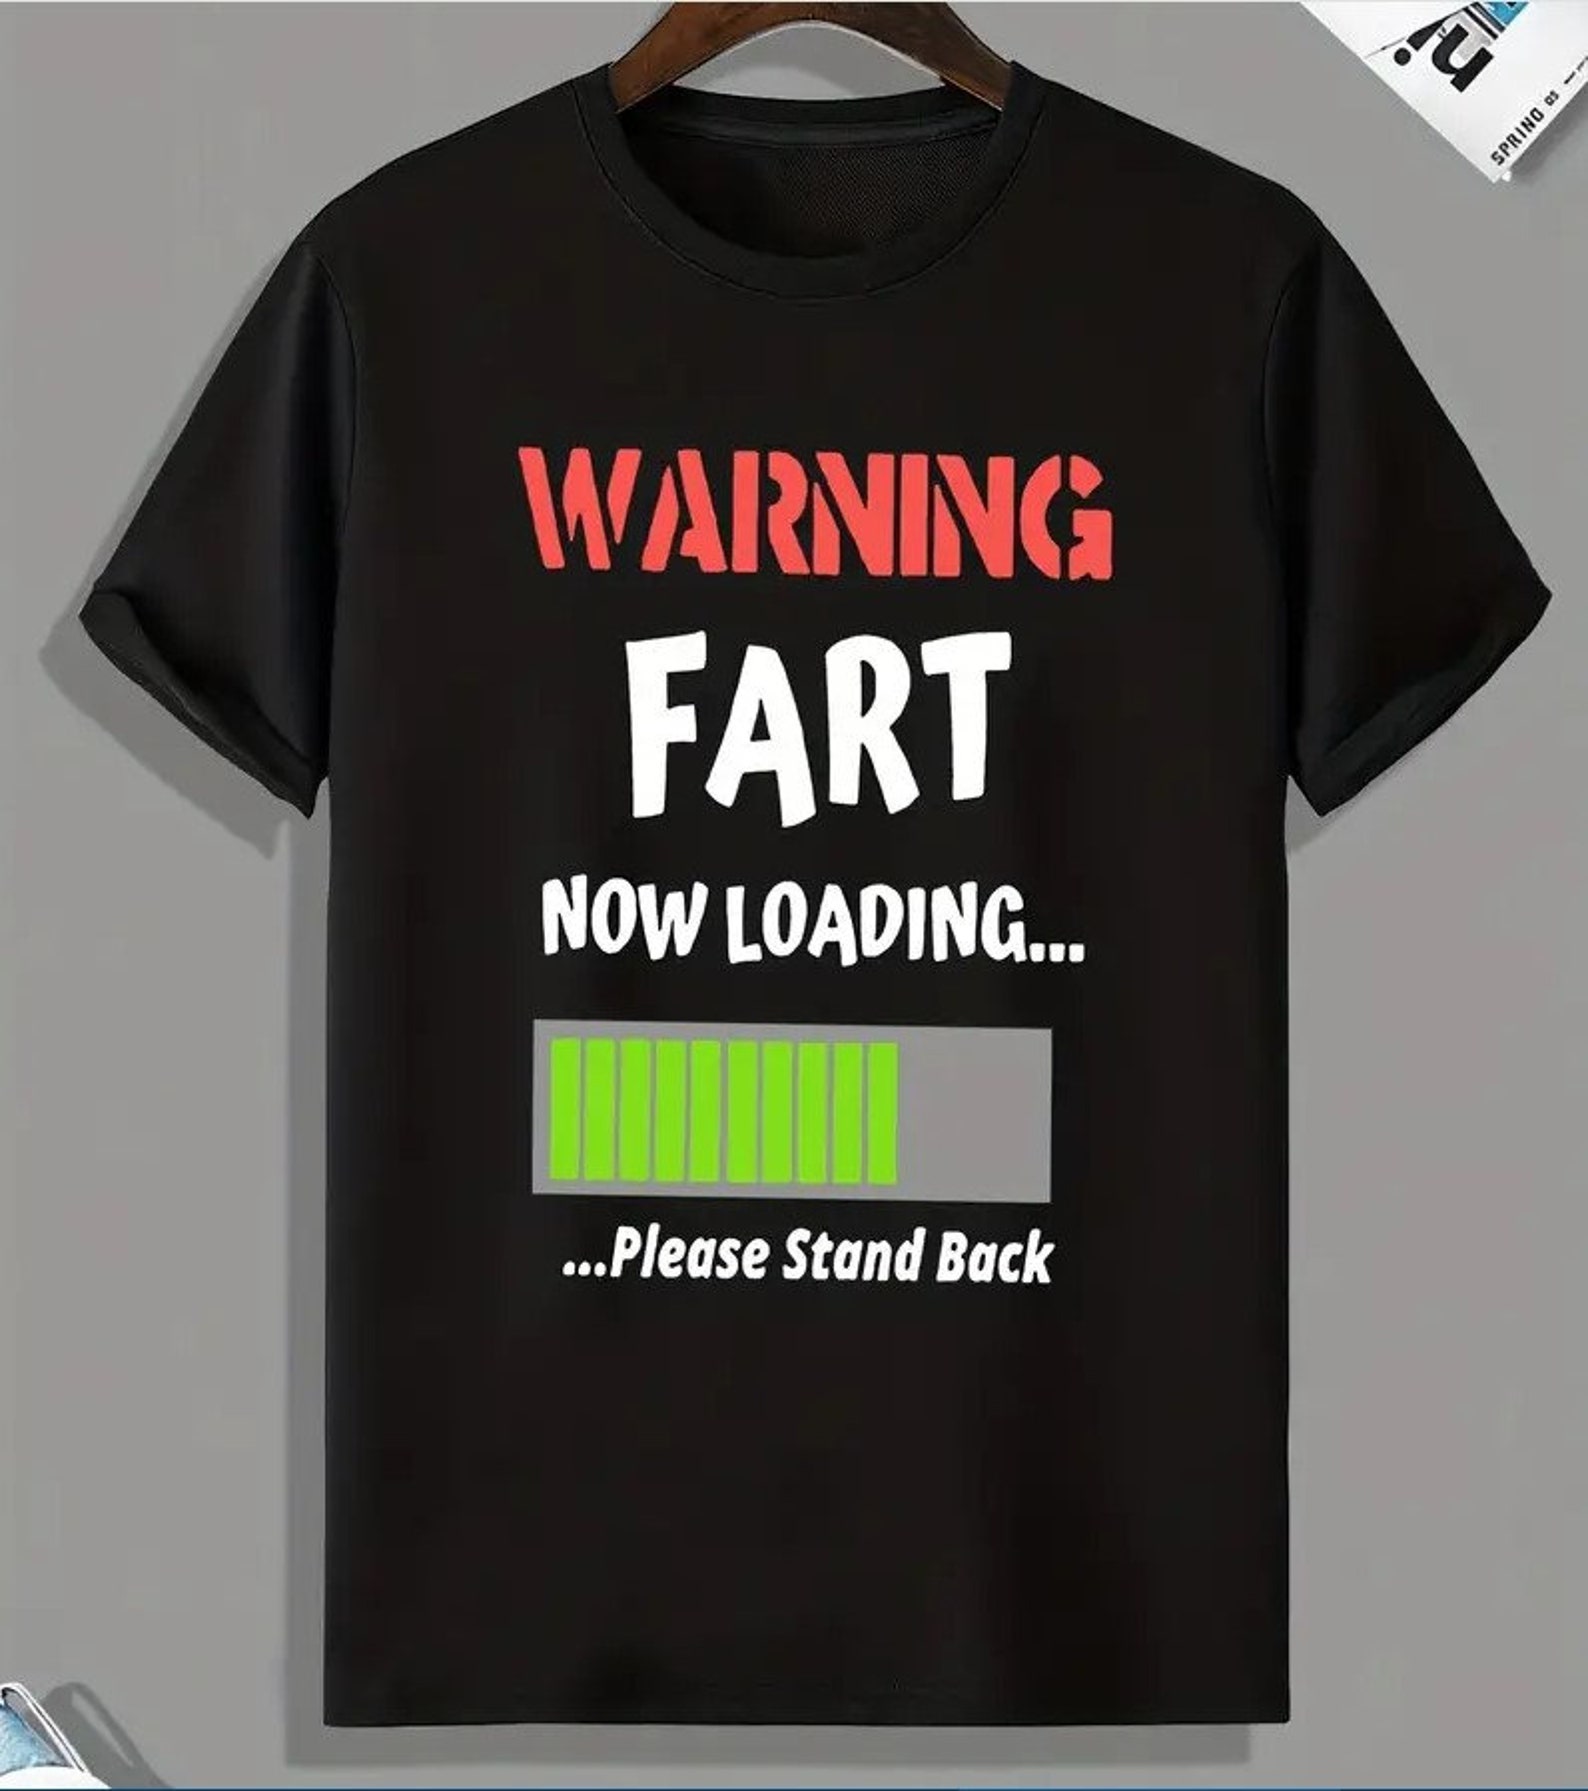 2XL Warning Fart Now Loading Please Stand Back T-shirt Tee Clothes Men ...